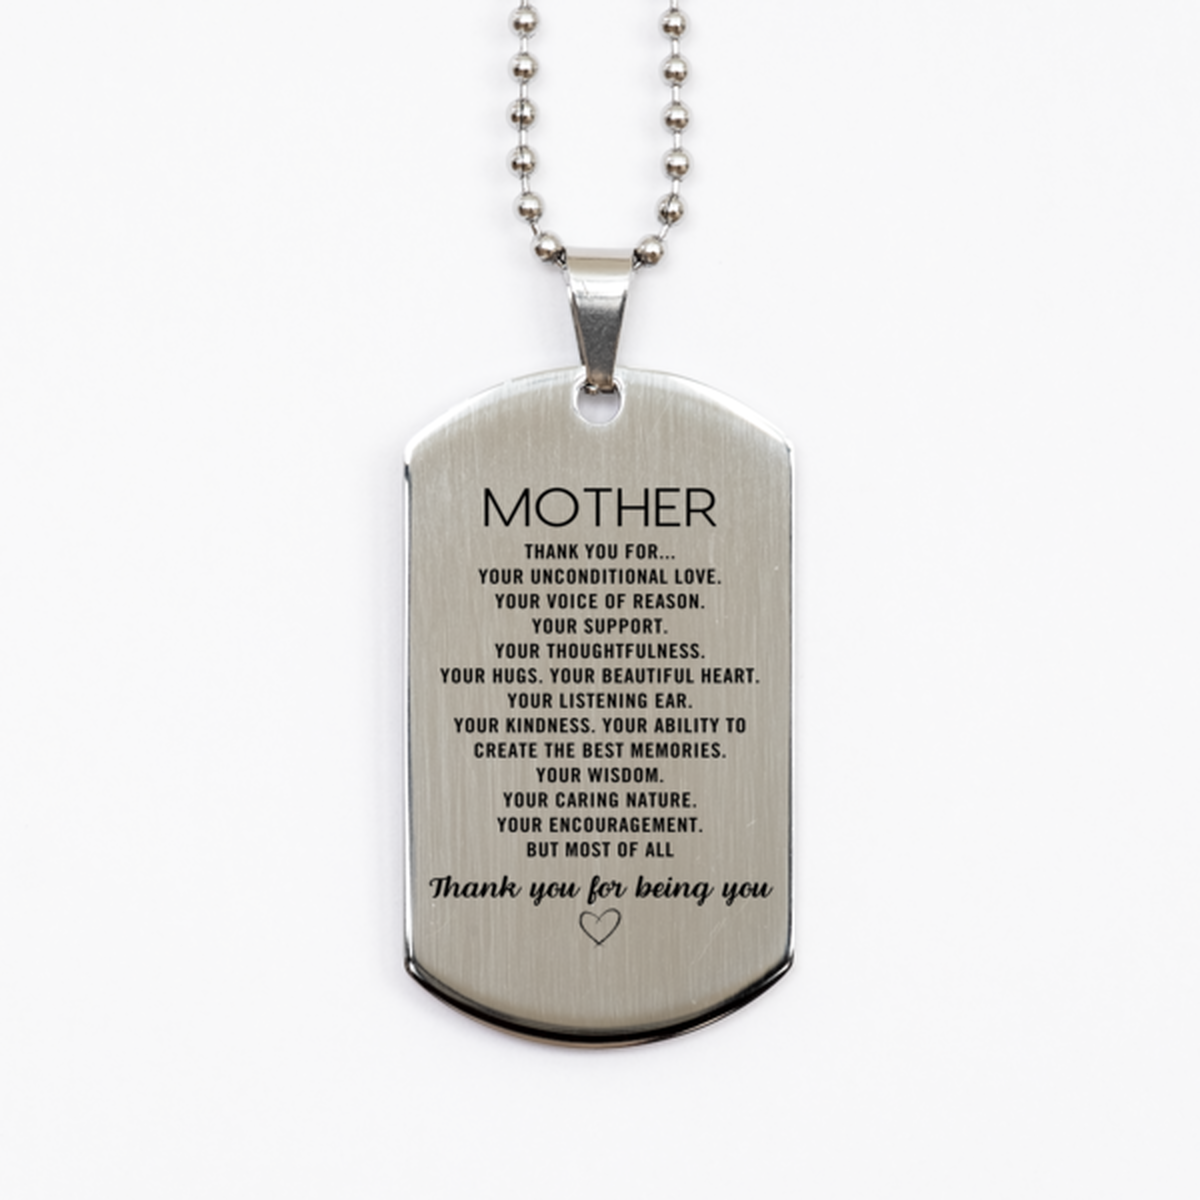 Mother Silver Dog Tag Custom, Engraved Gifts For Mother Christmas Graduation Birthday Gifts for Men Women Mother Thank you for Your unconditional love